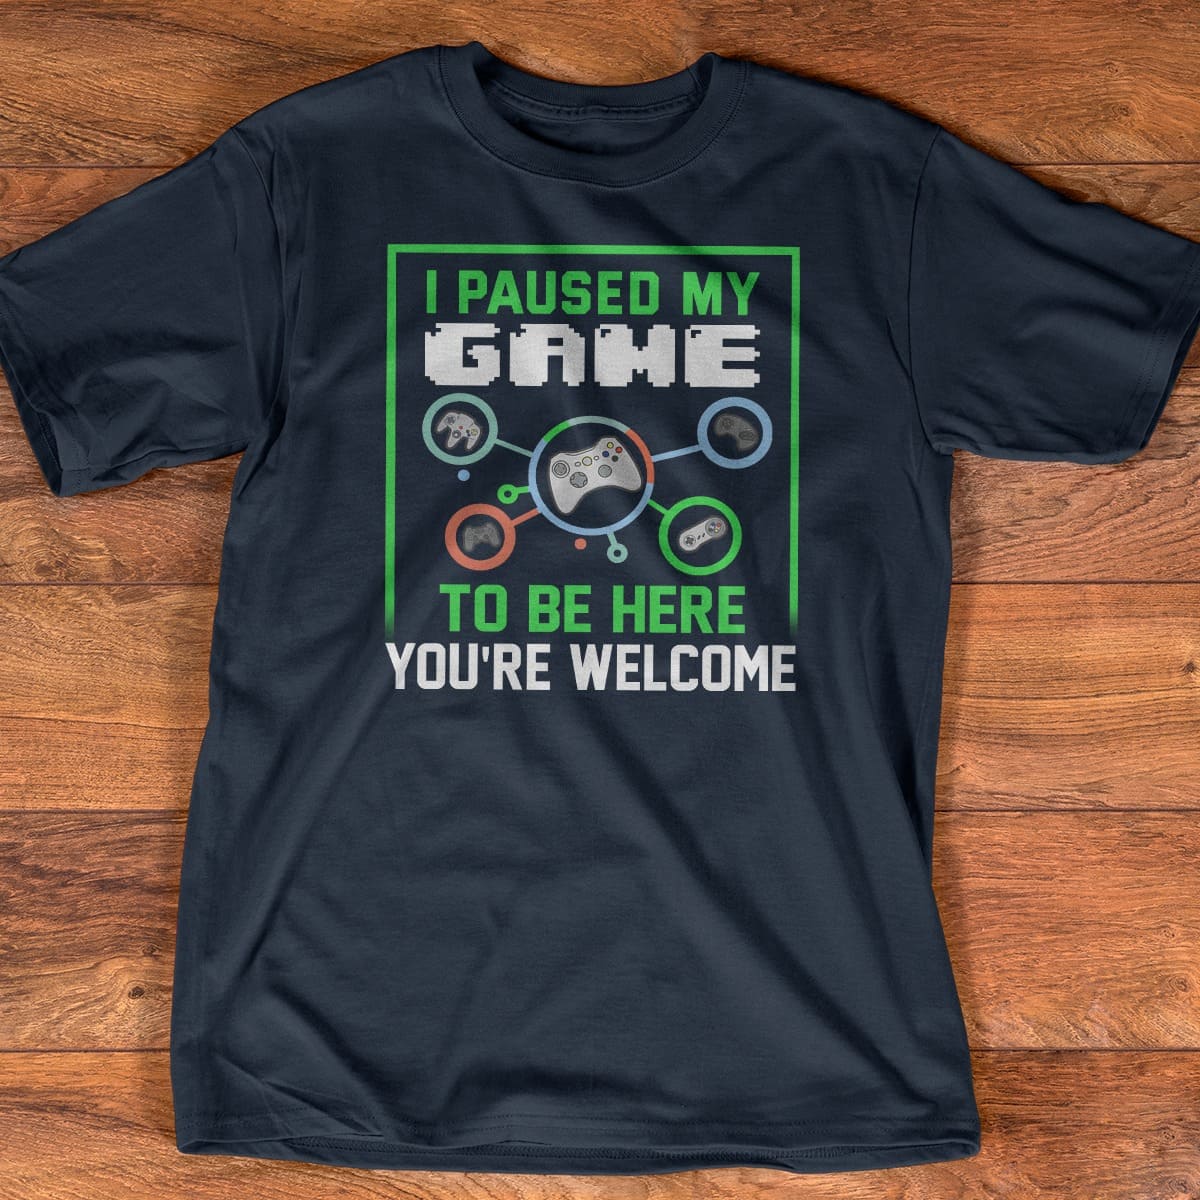 I paused my game to be here you're welcome - Gaming people gift, T-shirt for gamers